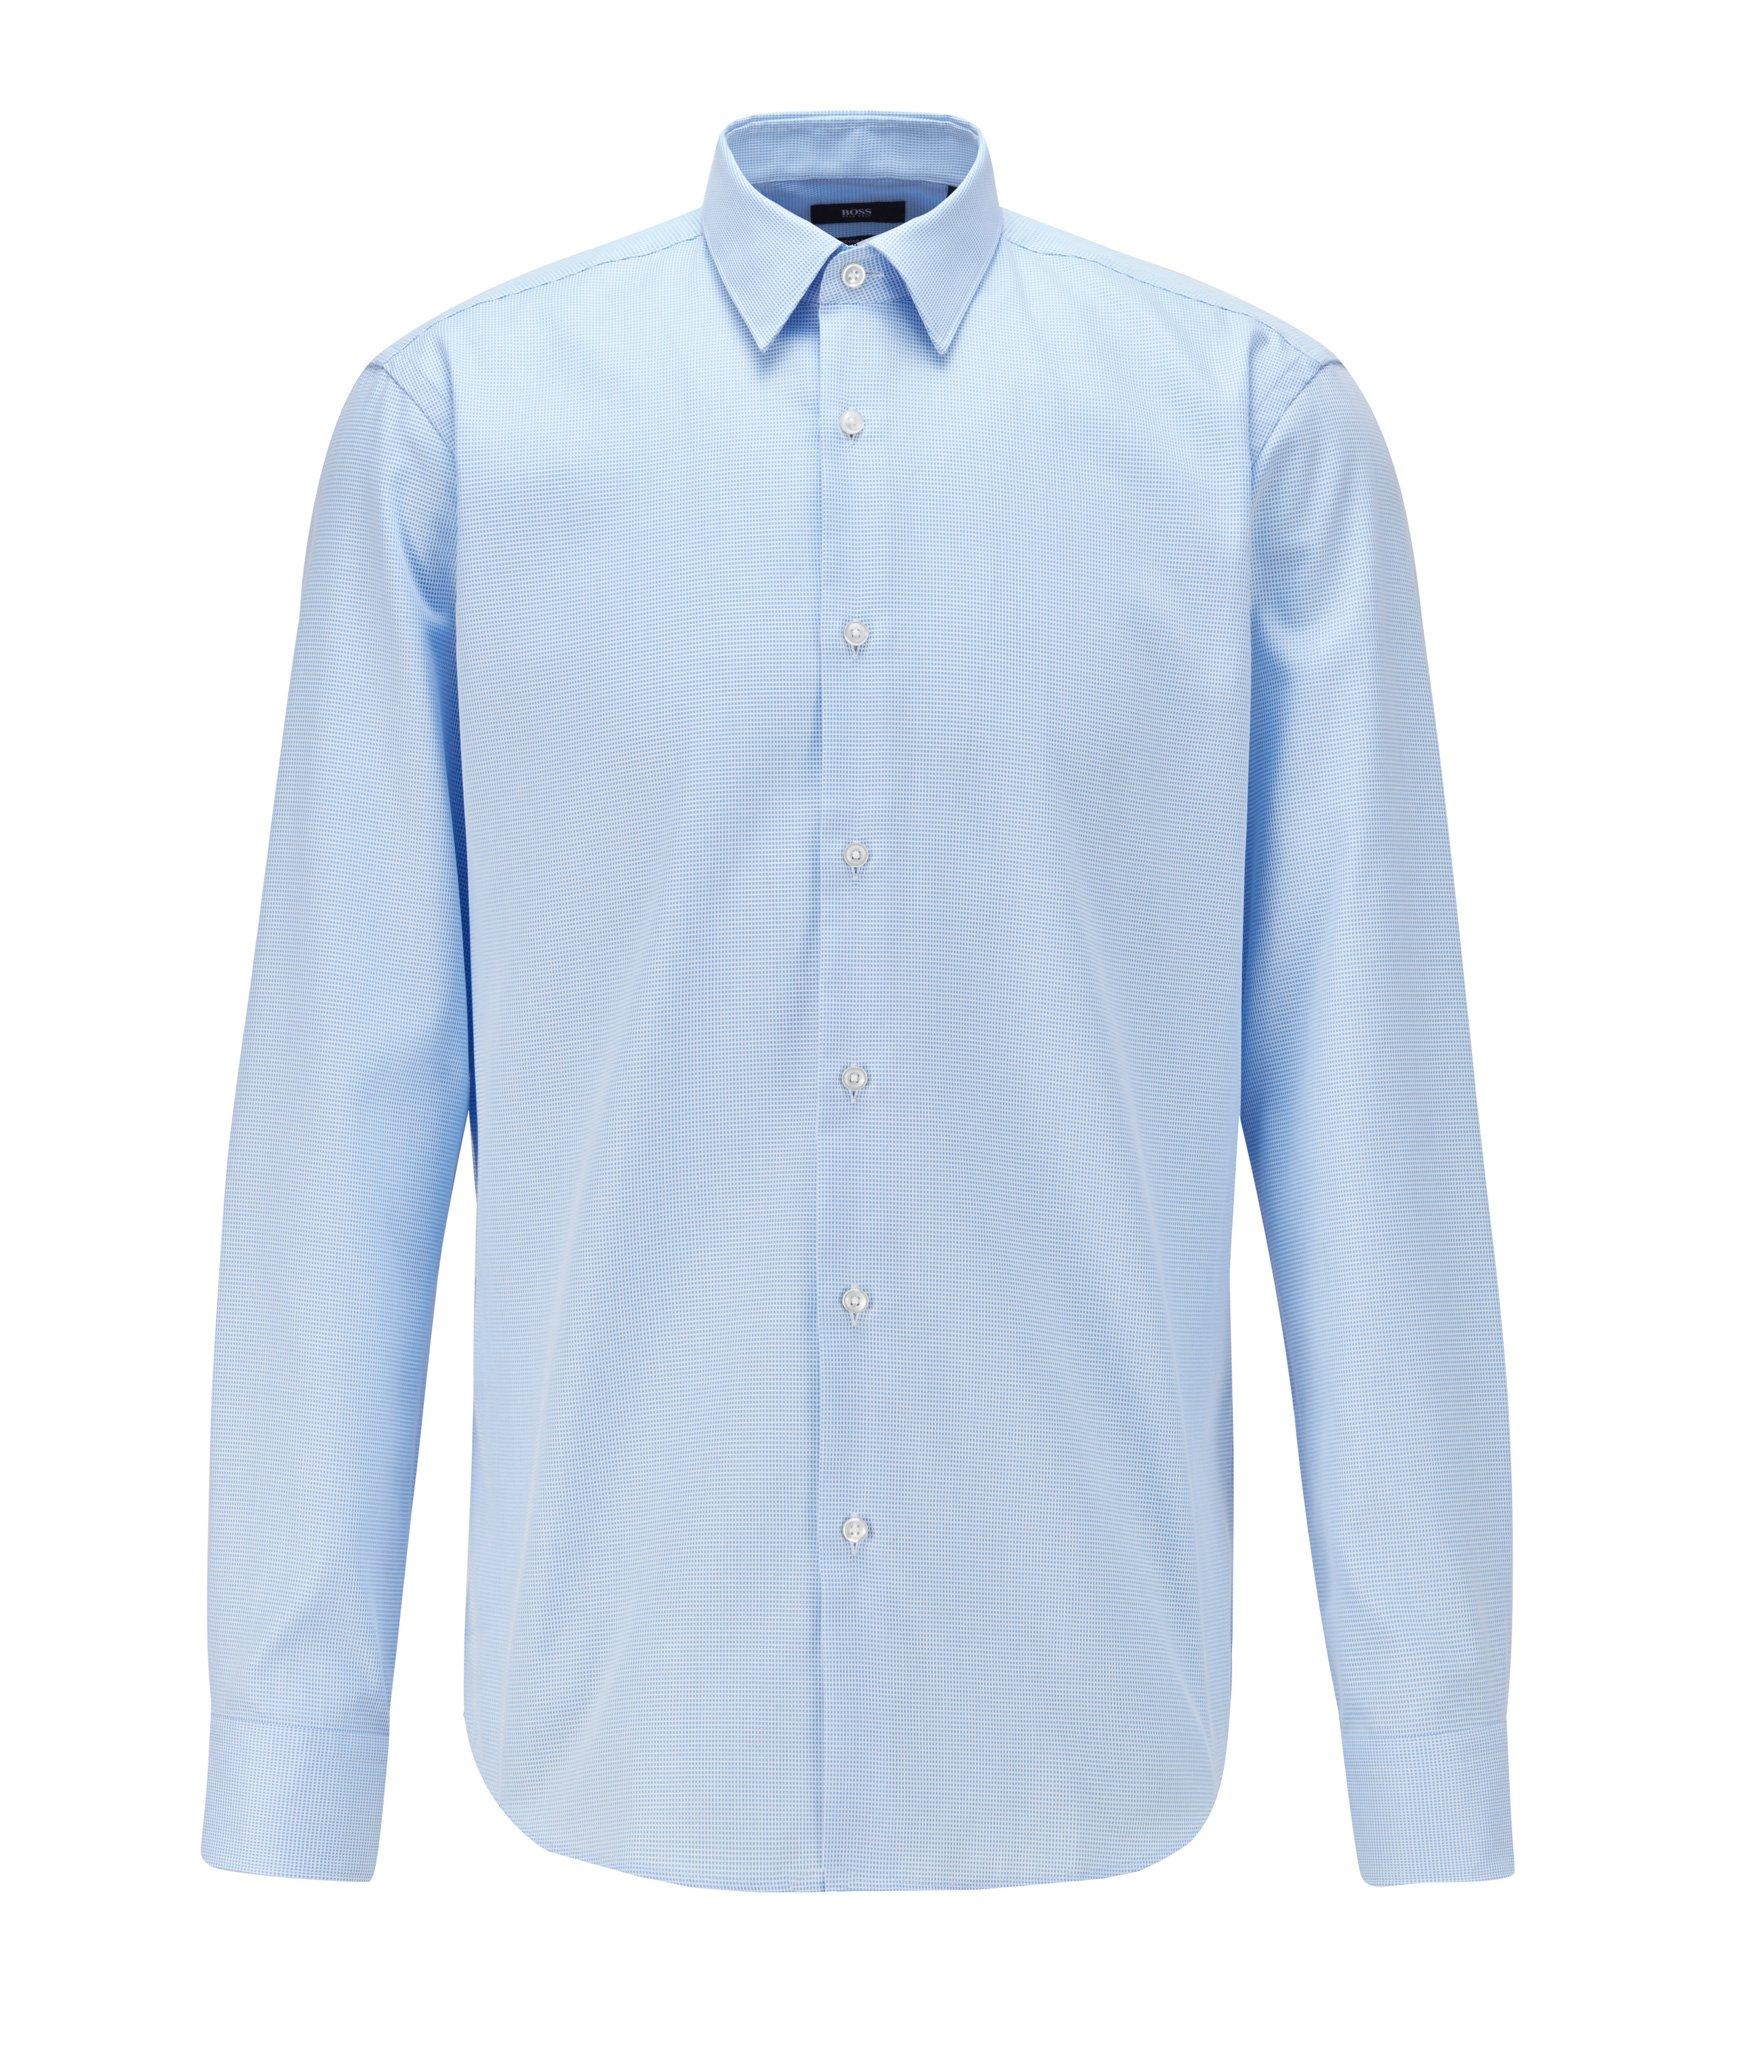 Contemporary-Fit Easy-Iron Dress Shirt image 0